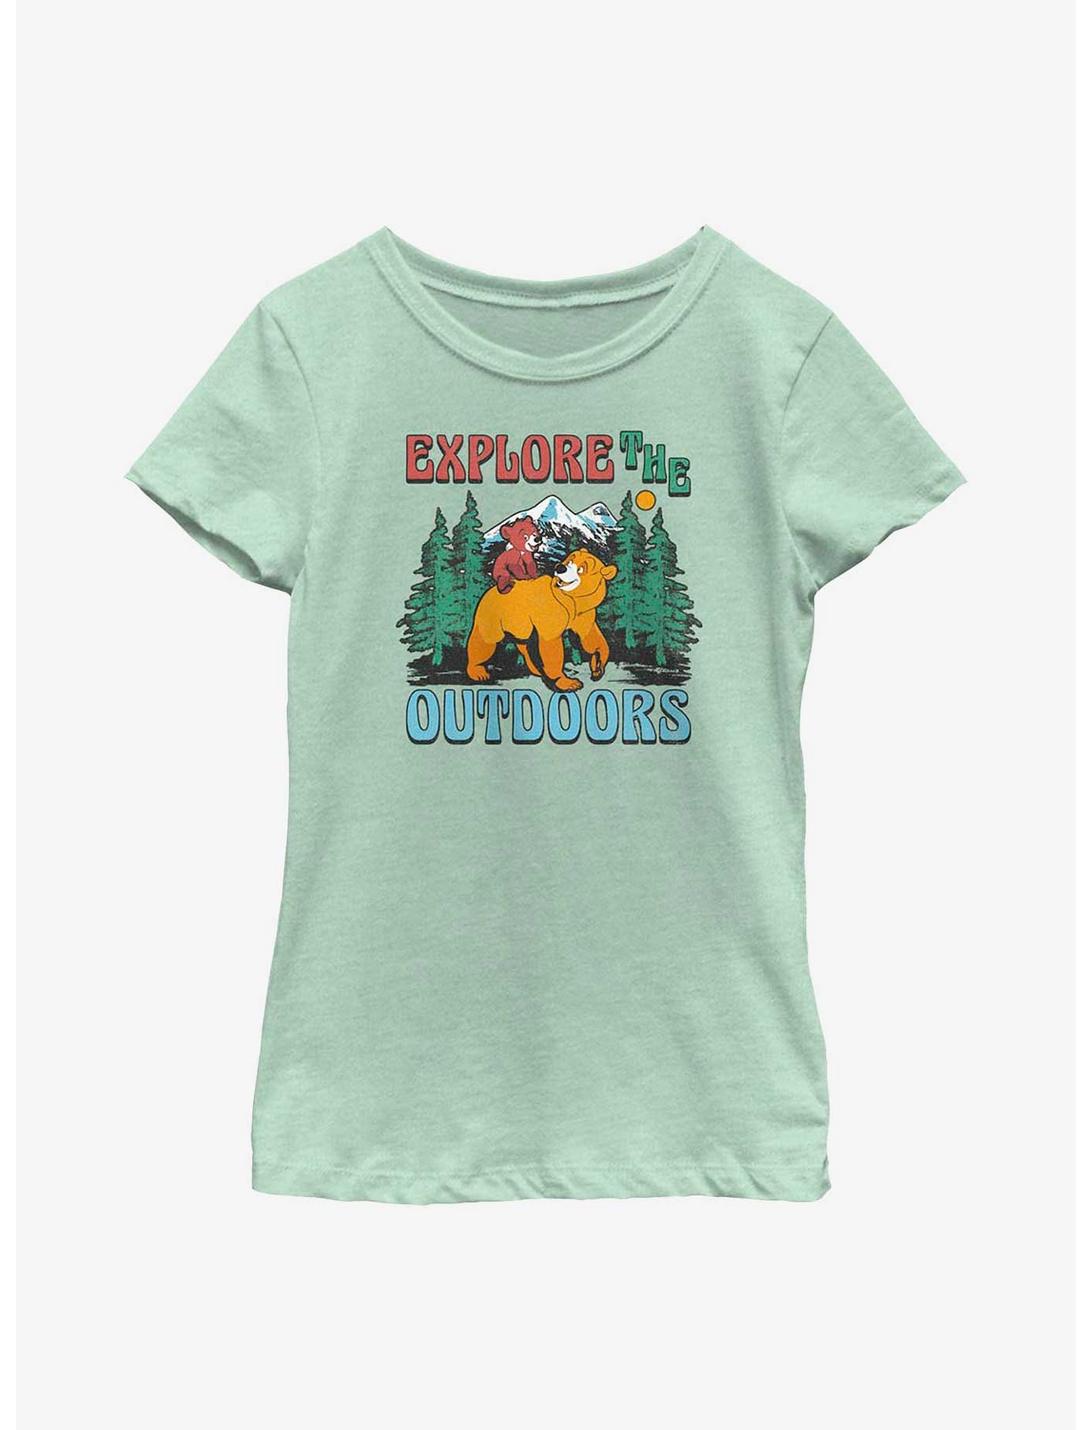 Disney Brother Bear Explore The Outdoors Youth Girls T-Shirt, MINT, hi-res